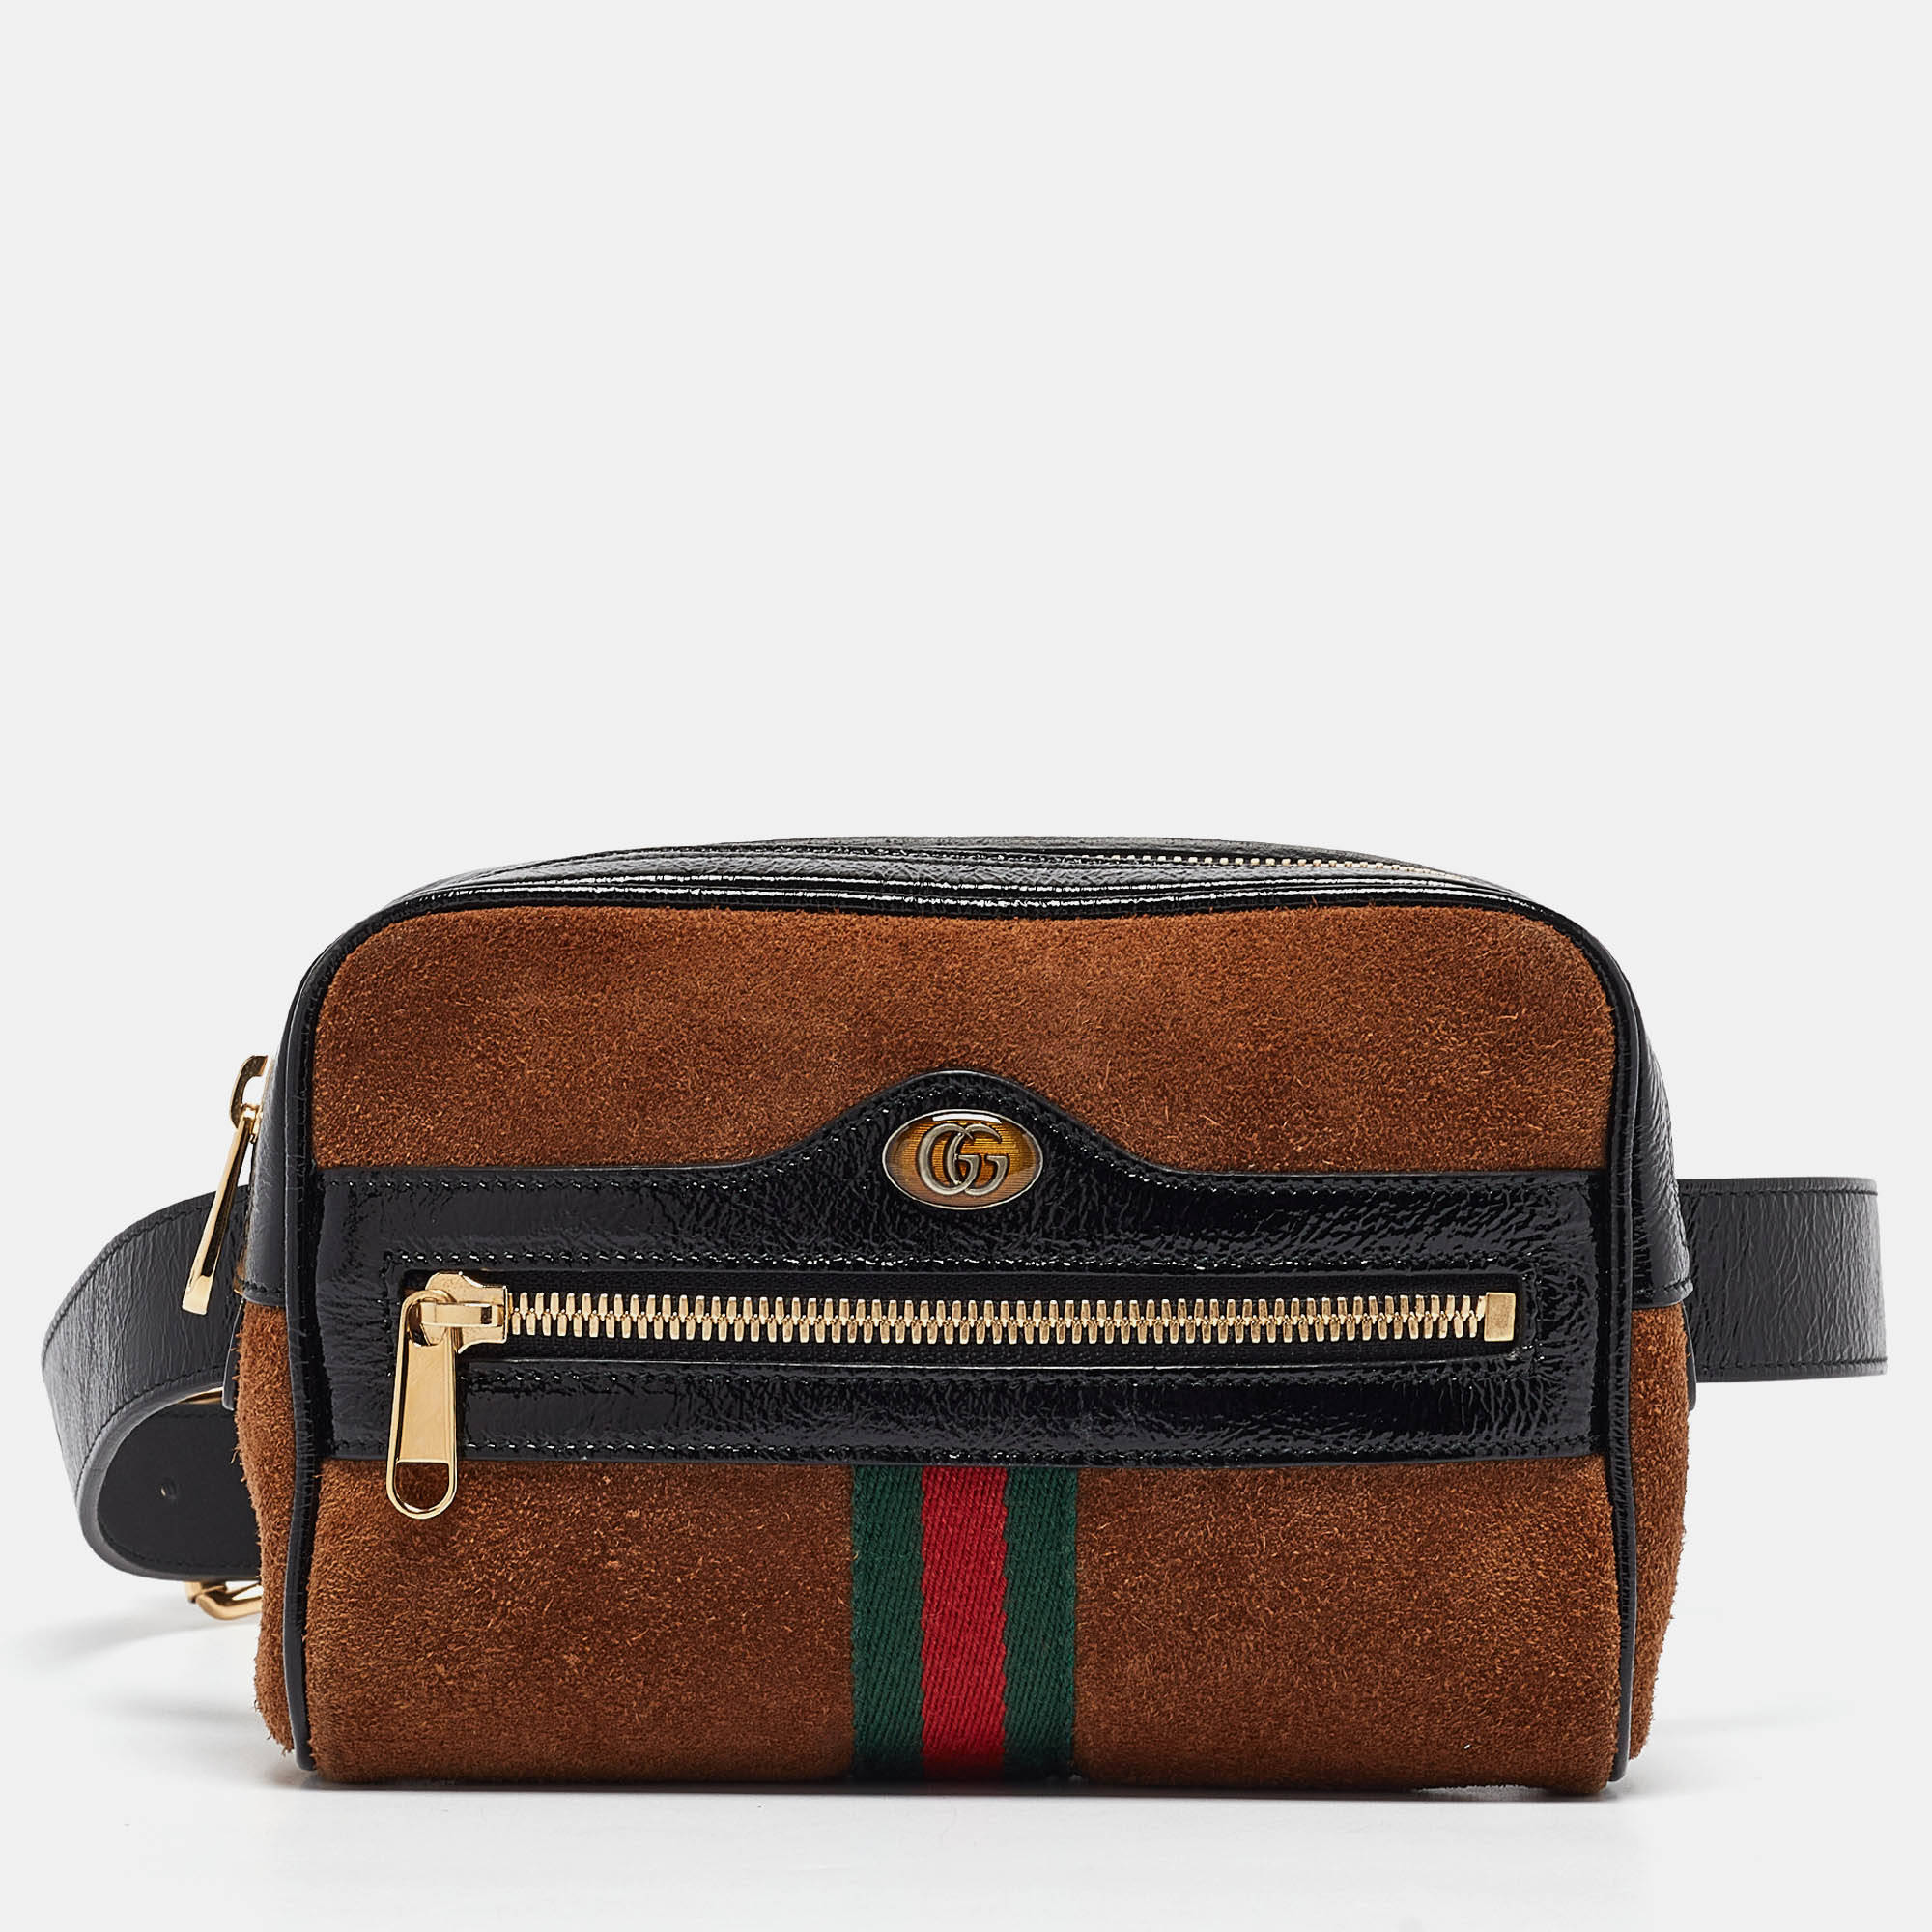 Gucci black/brown suede and patent leather ophidia belt bag